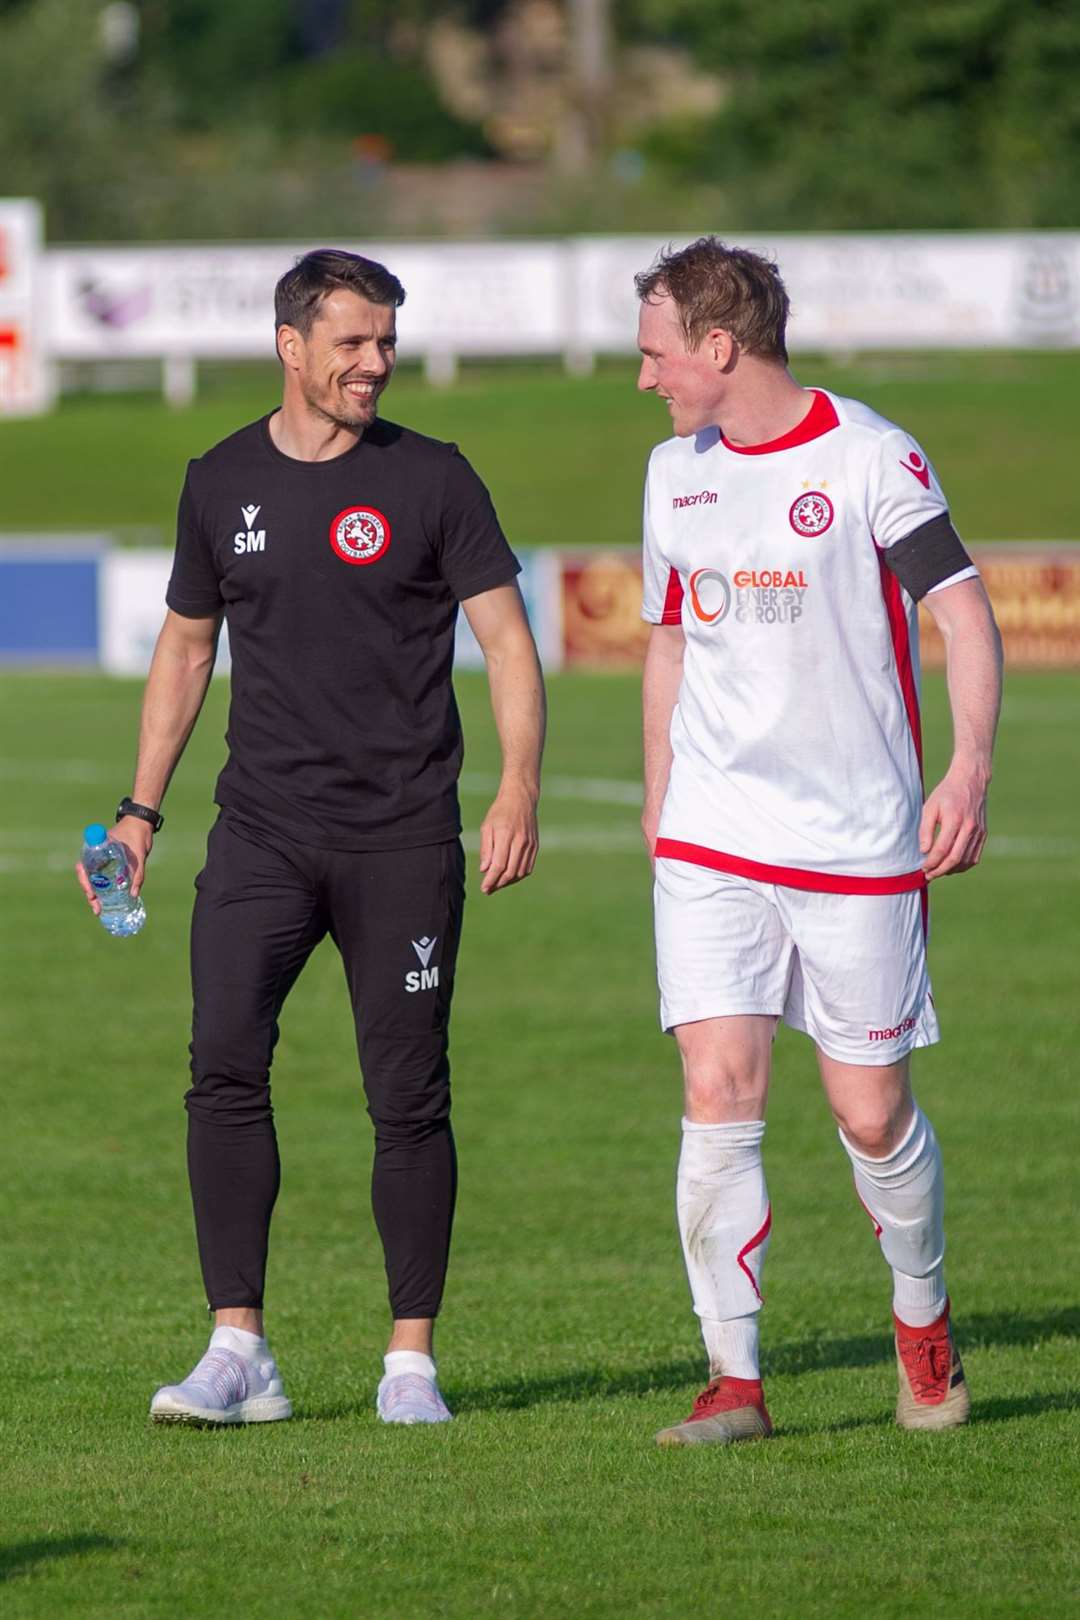 Brora Rangers Are Targeting Forfar Athletic To Win In League Cup Group Stage